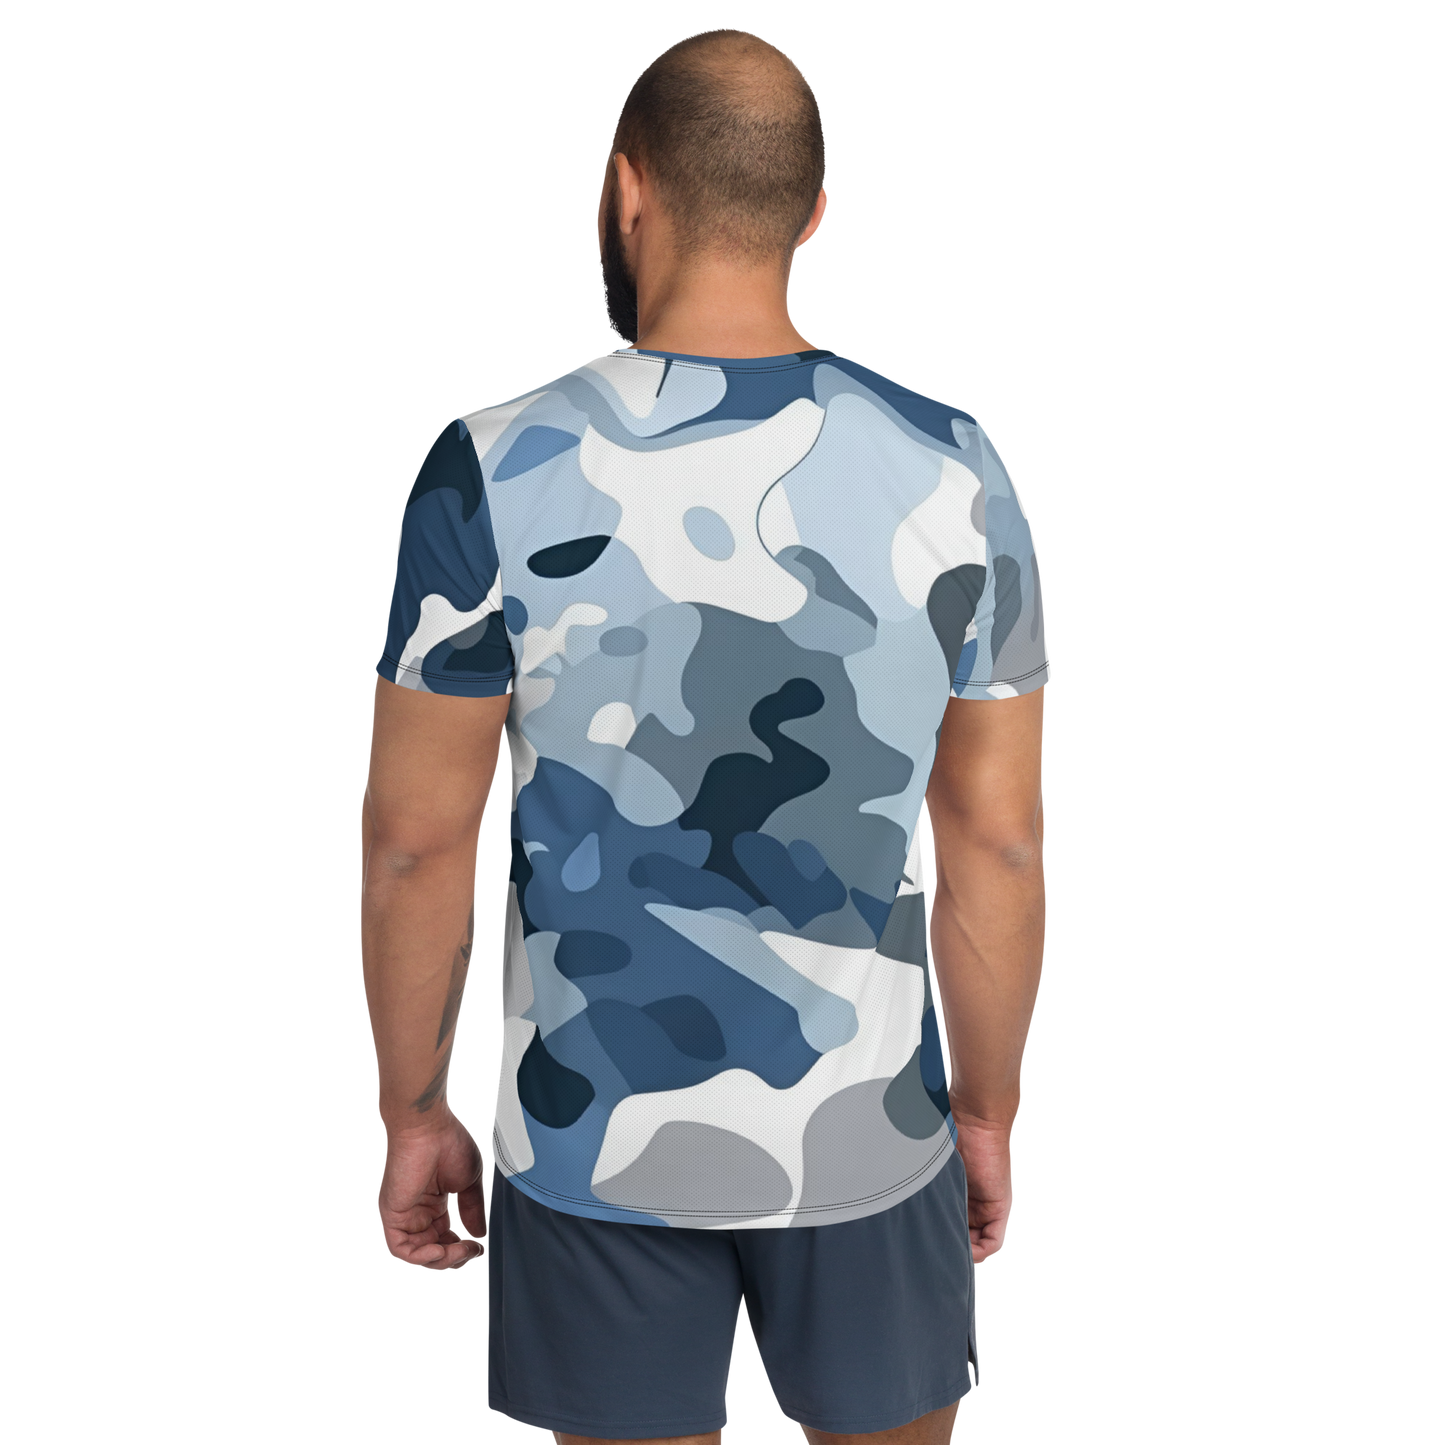 All-Over Print Men's Athletic T-Shirt